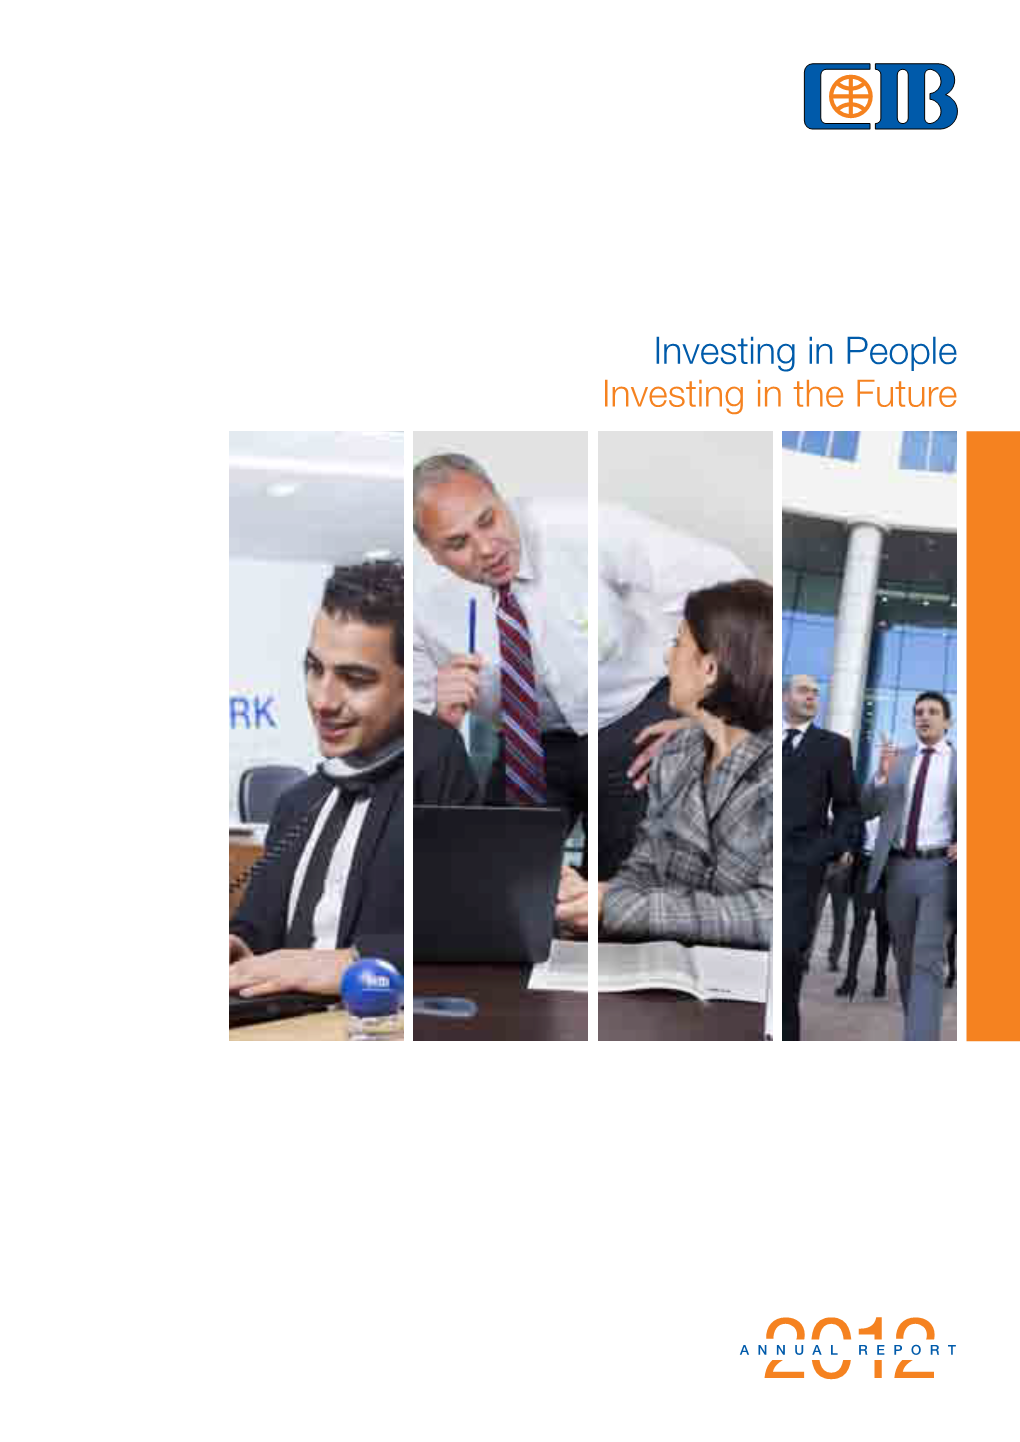 Investing in People Investing in the Future